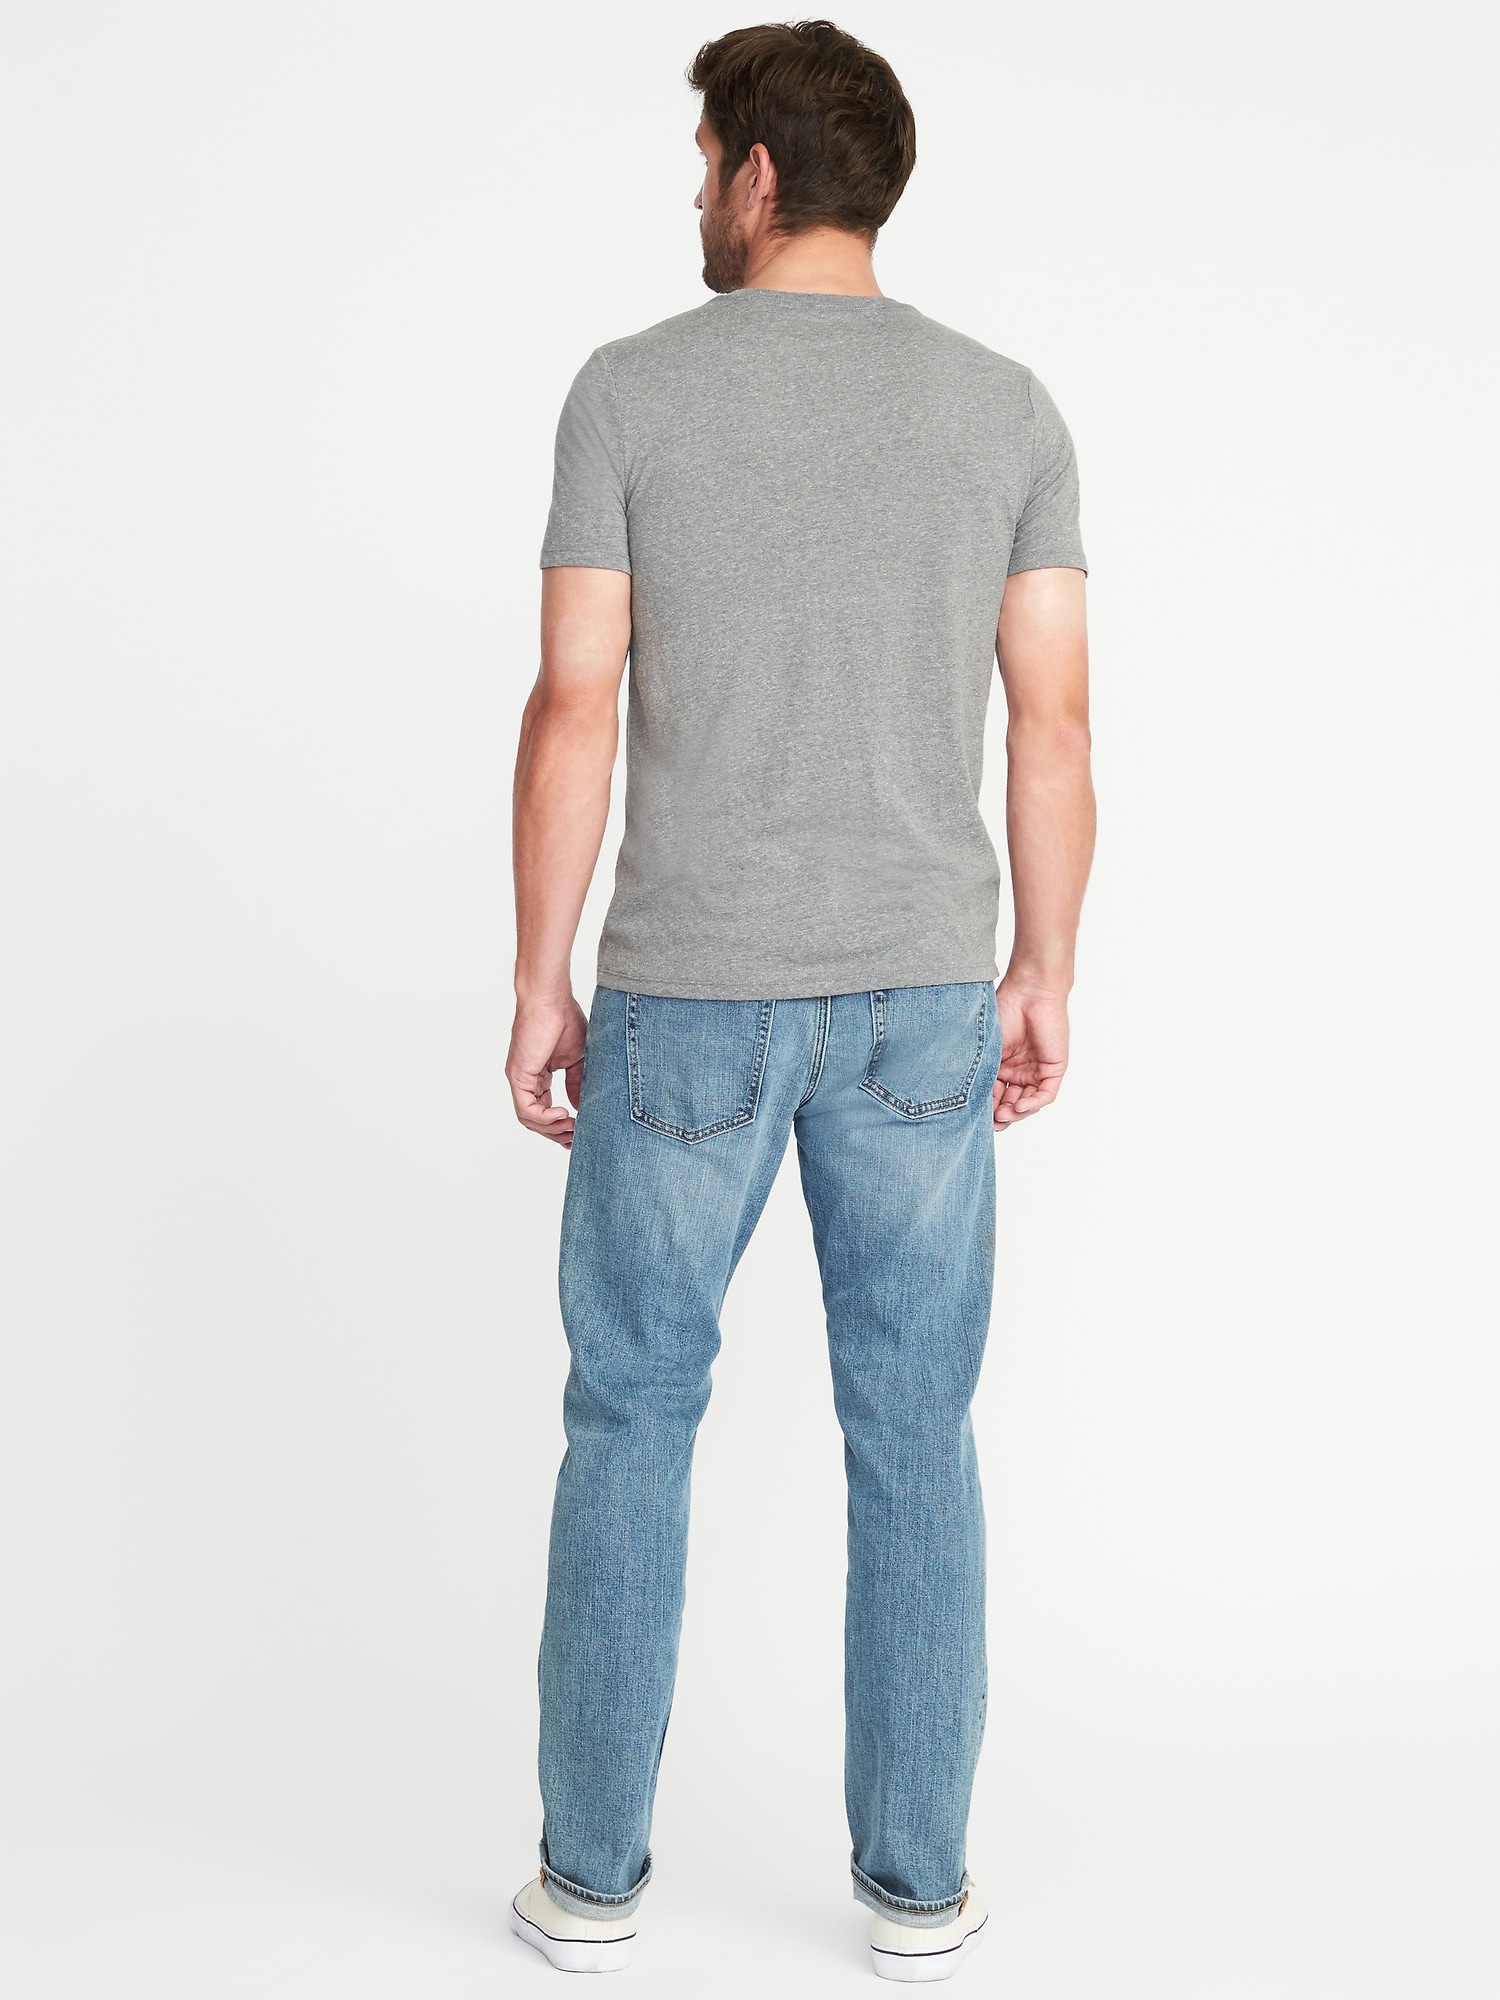 Soft-Washed Graphic Tee for Men | Old Navy